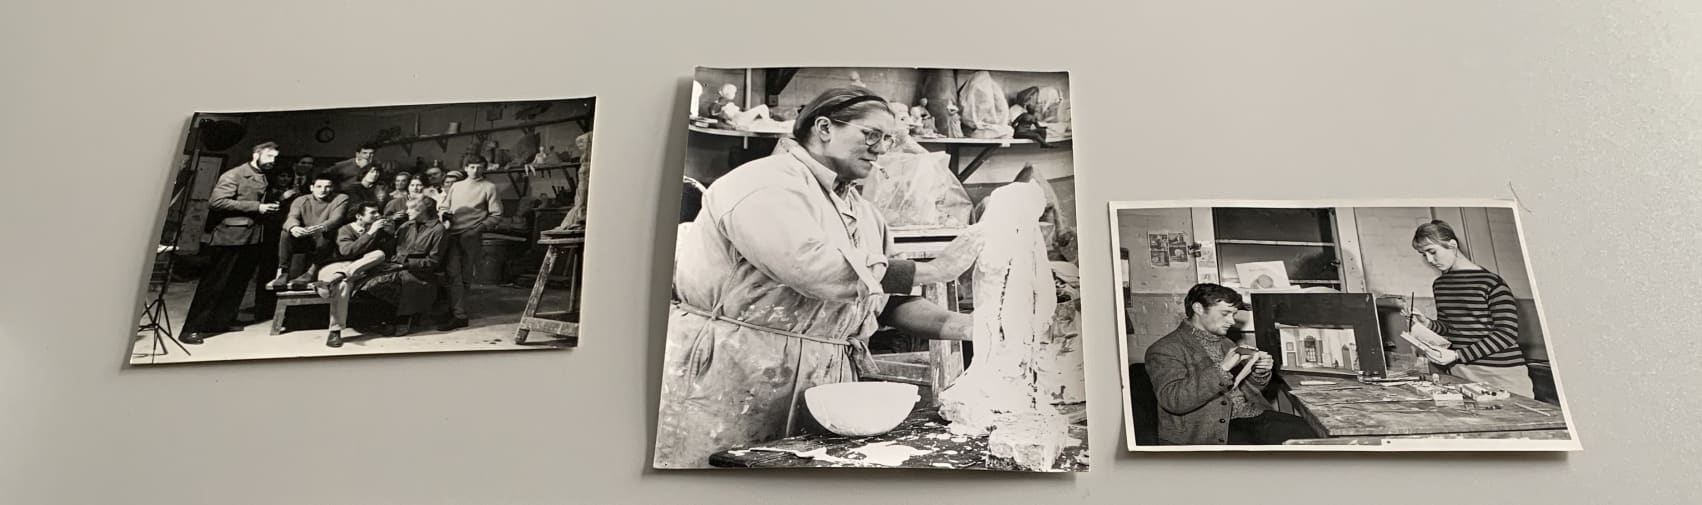 Colour photograph of a selection of black and white photographic prints showing tutors and students at work in sculpture studios, theatre productions and in group photo settings